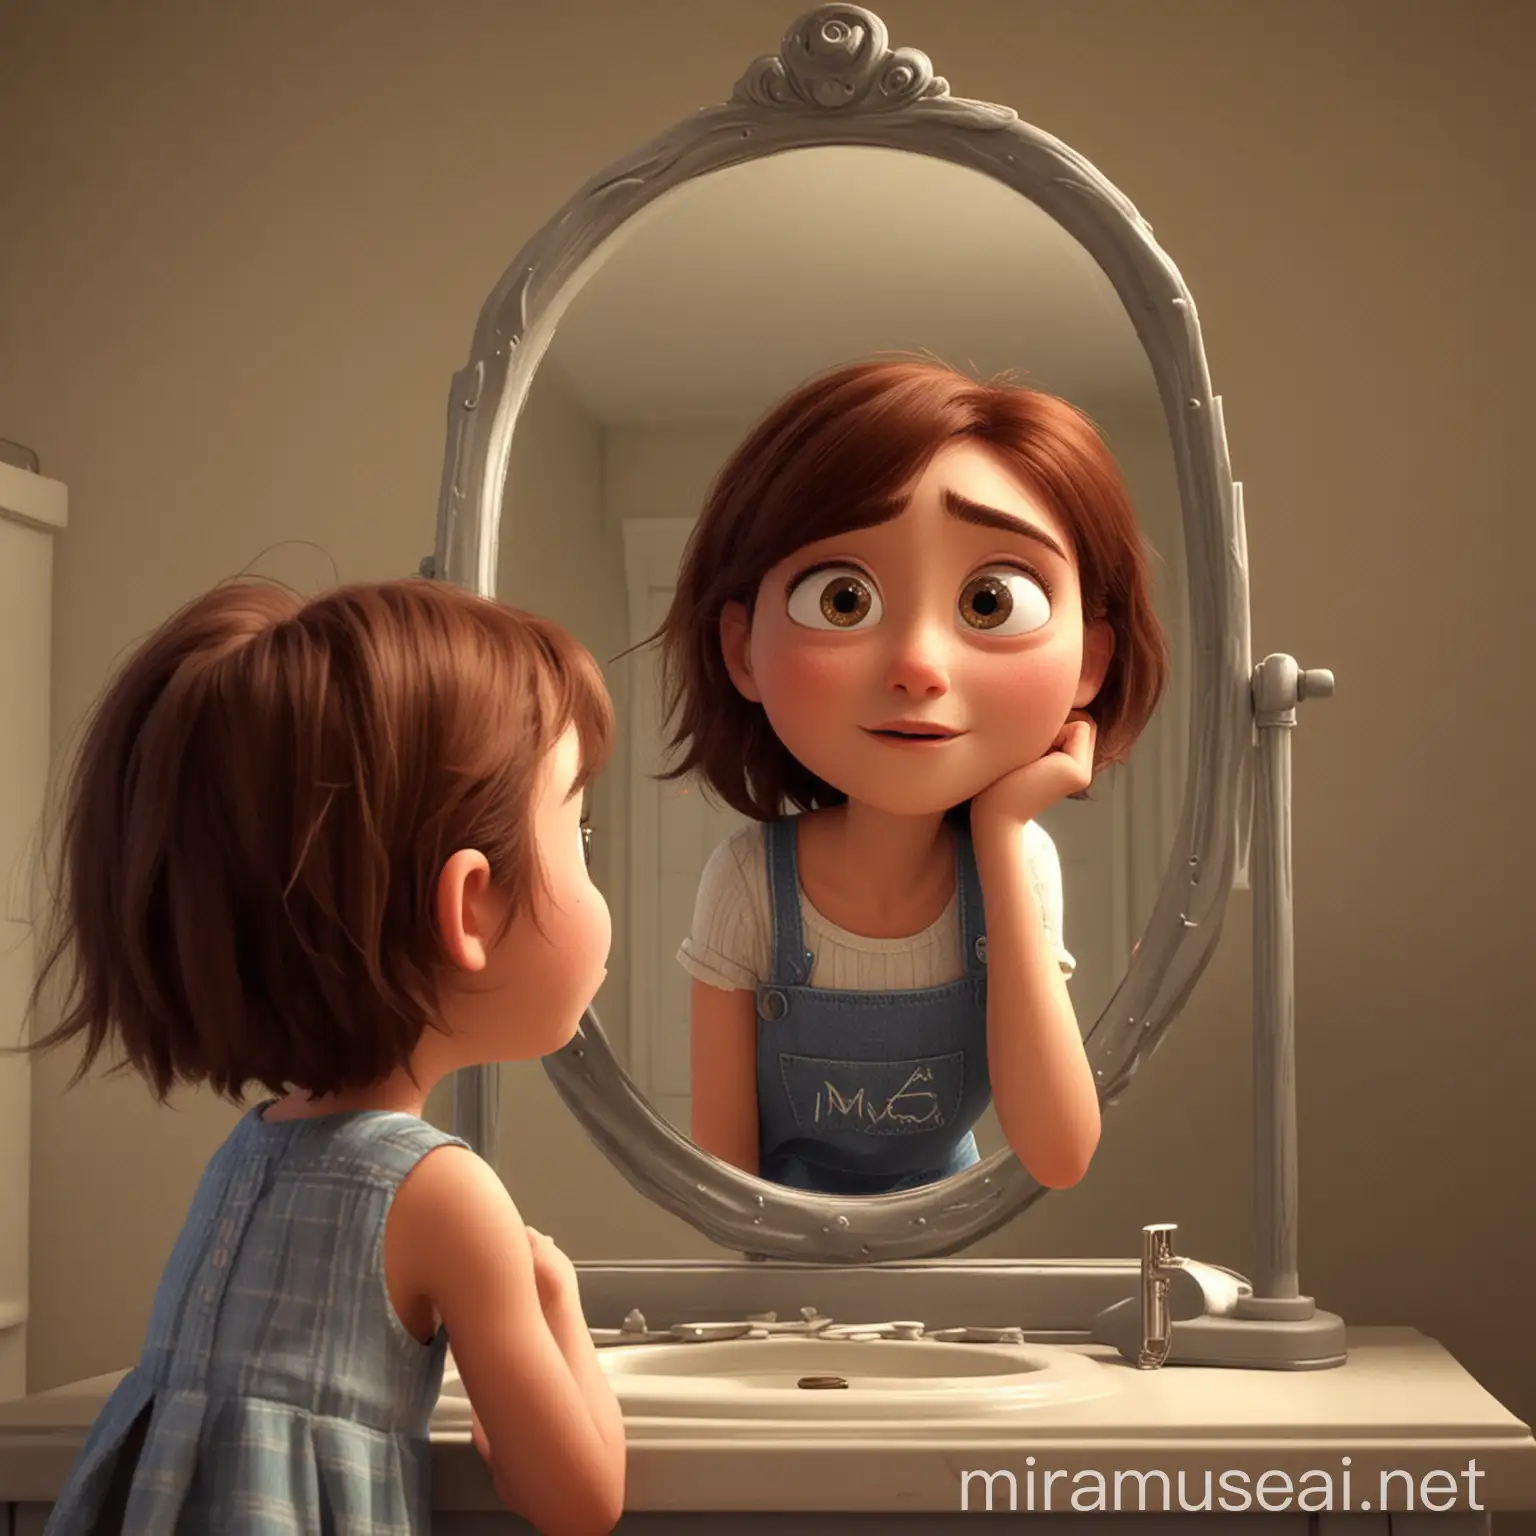 A mother is looking at herself in the mirror， pixar style